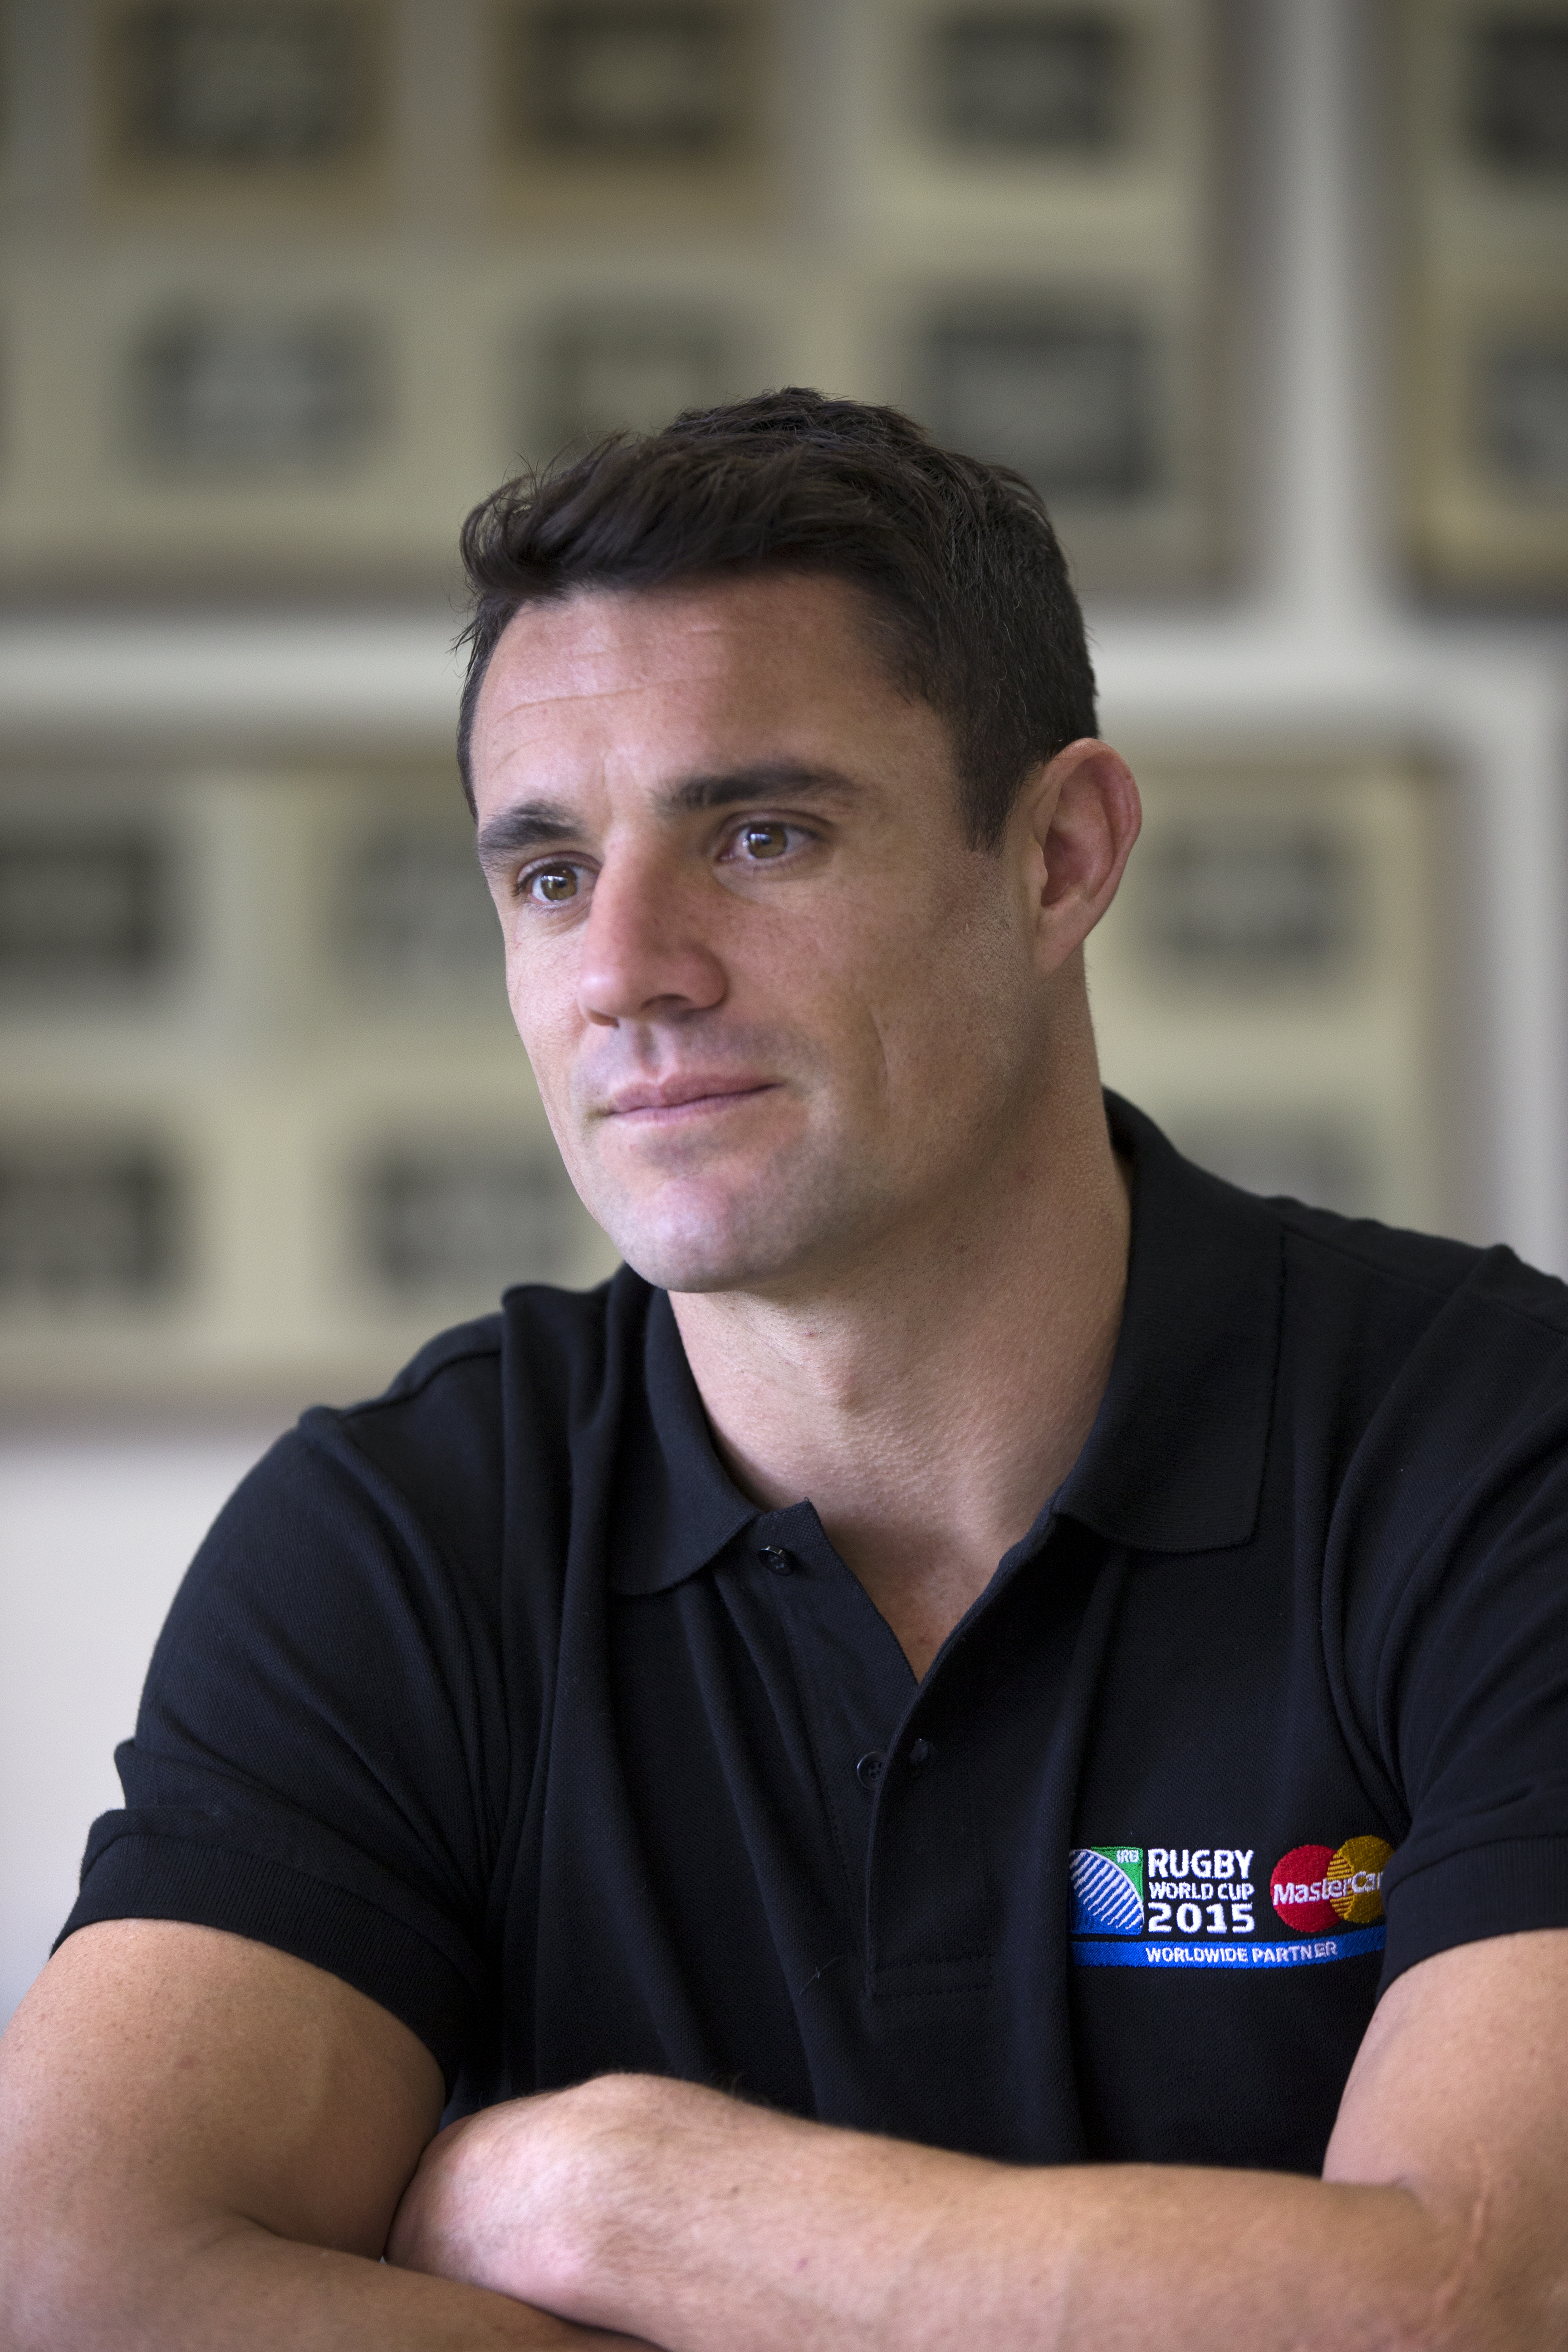 Dan Carter amazed at crowd of 90,000 for French final - NZ Herald